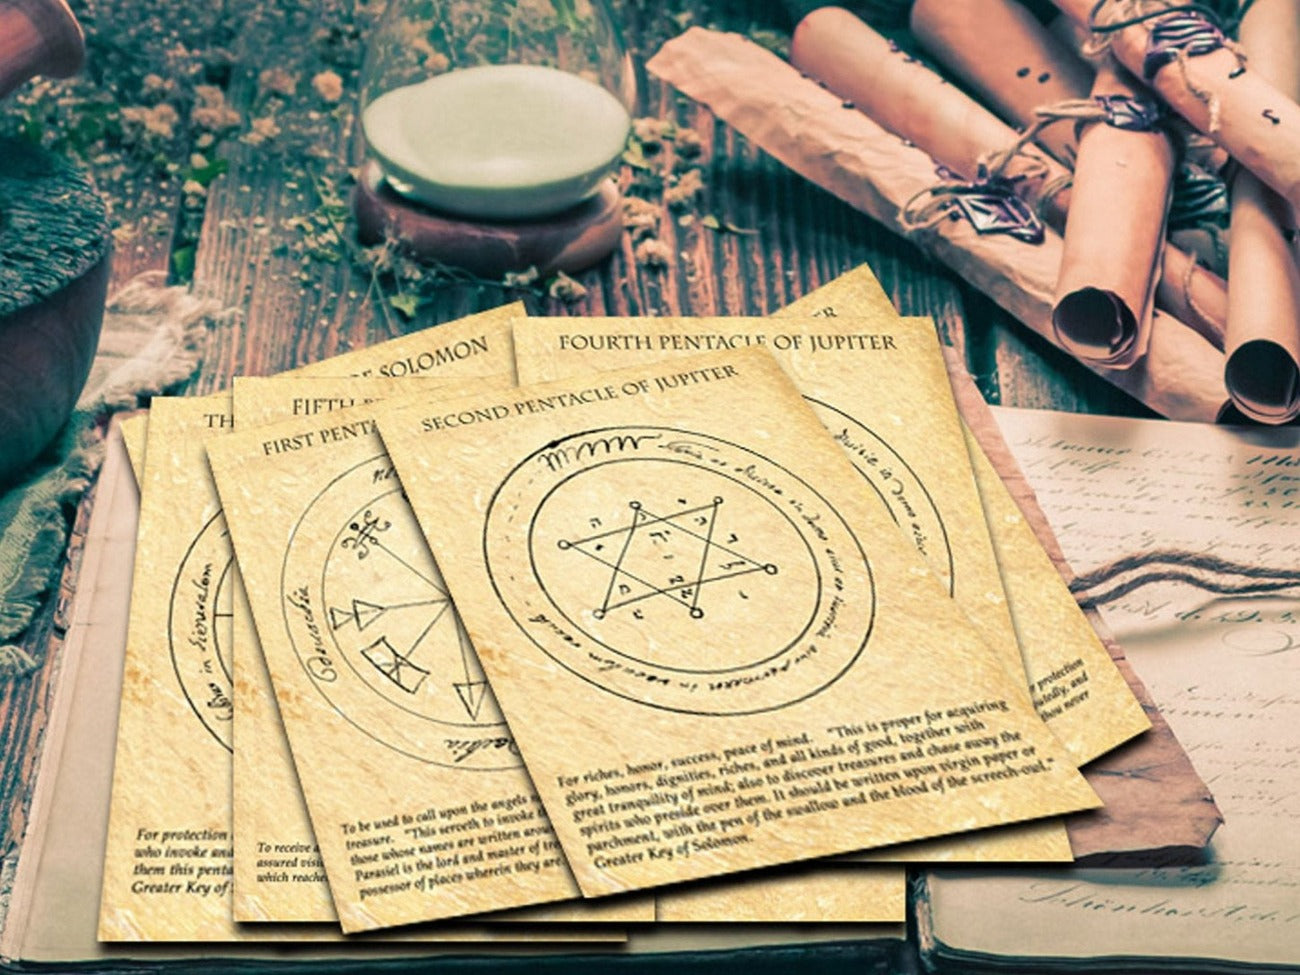 JUPITER PENTACLES of SOLOMON 7 Printable Pages - Morgana Magick Spell